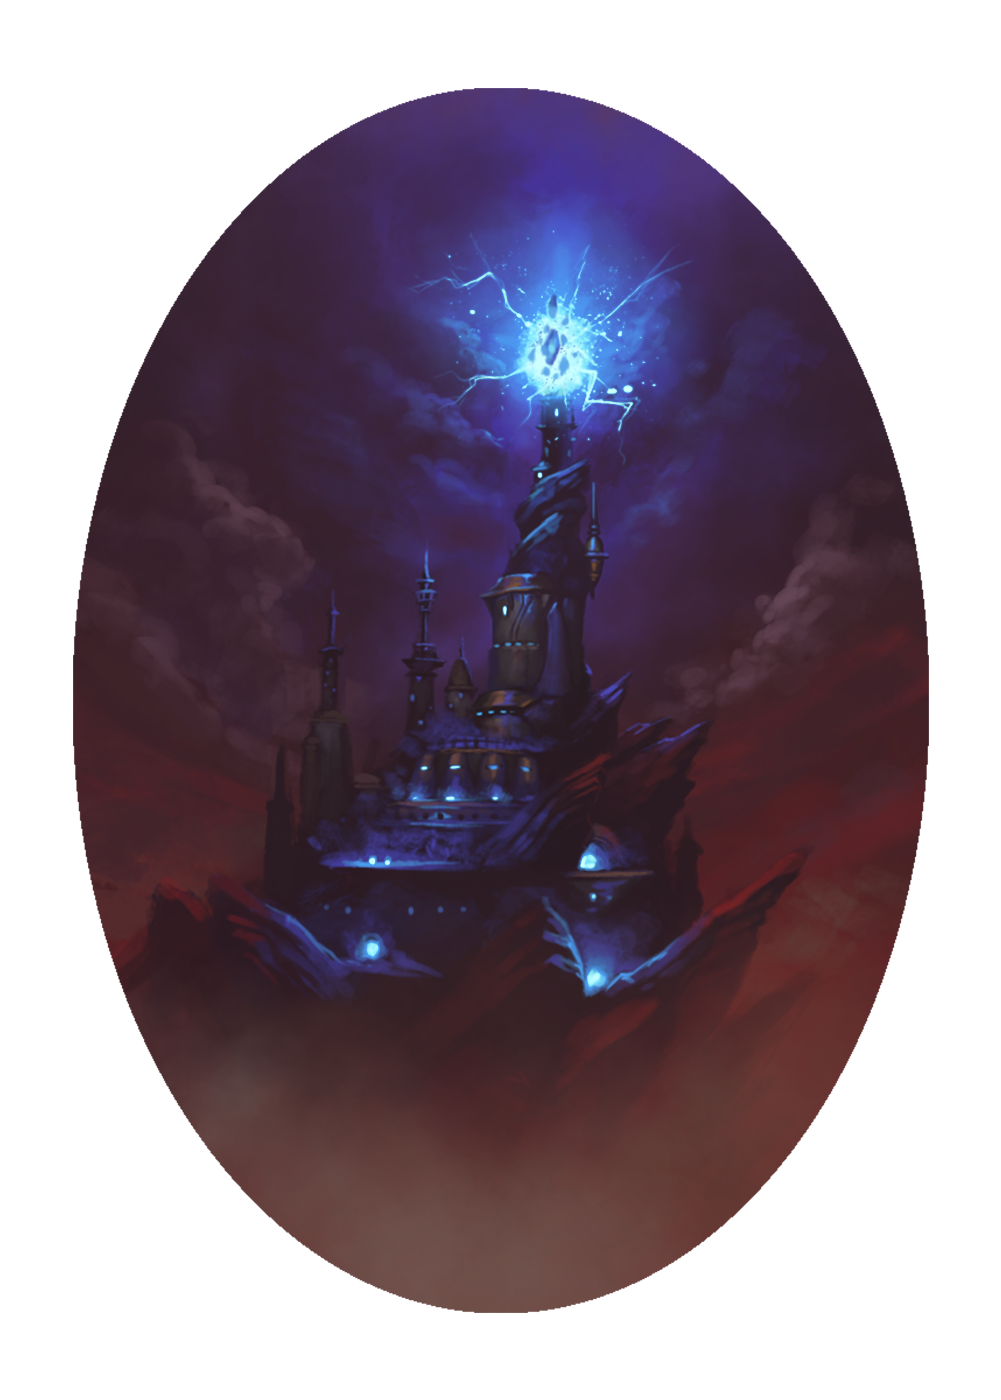 A fortress of stone and metal stands within a shroud of darkness on the surface of a barren planet; a crystalline tower tha tpierces the fortress glows with magical energy.